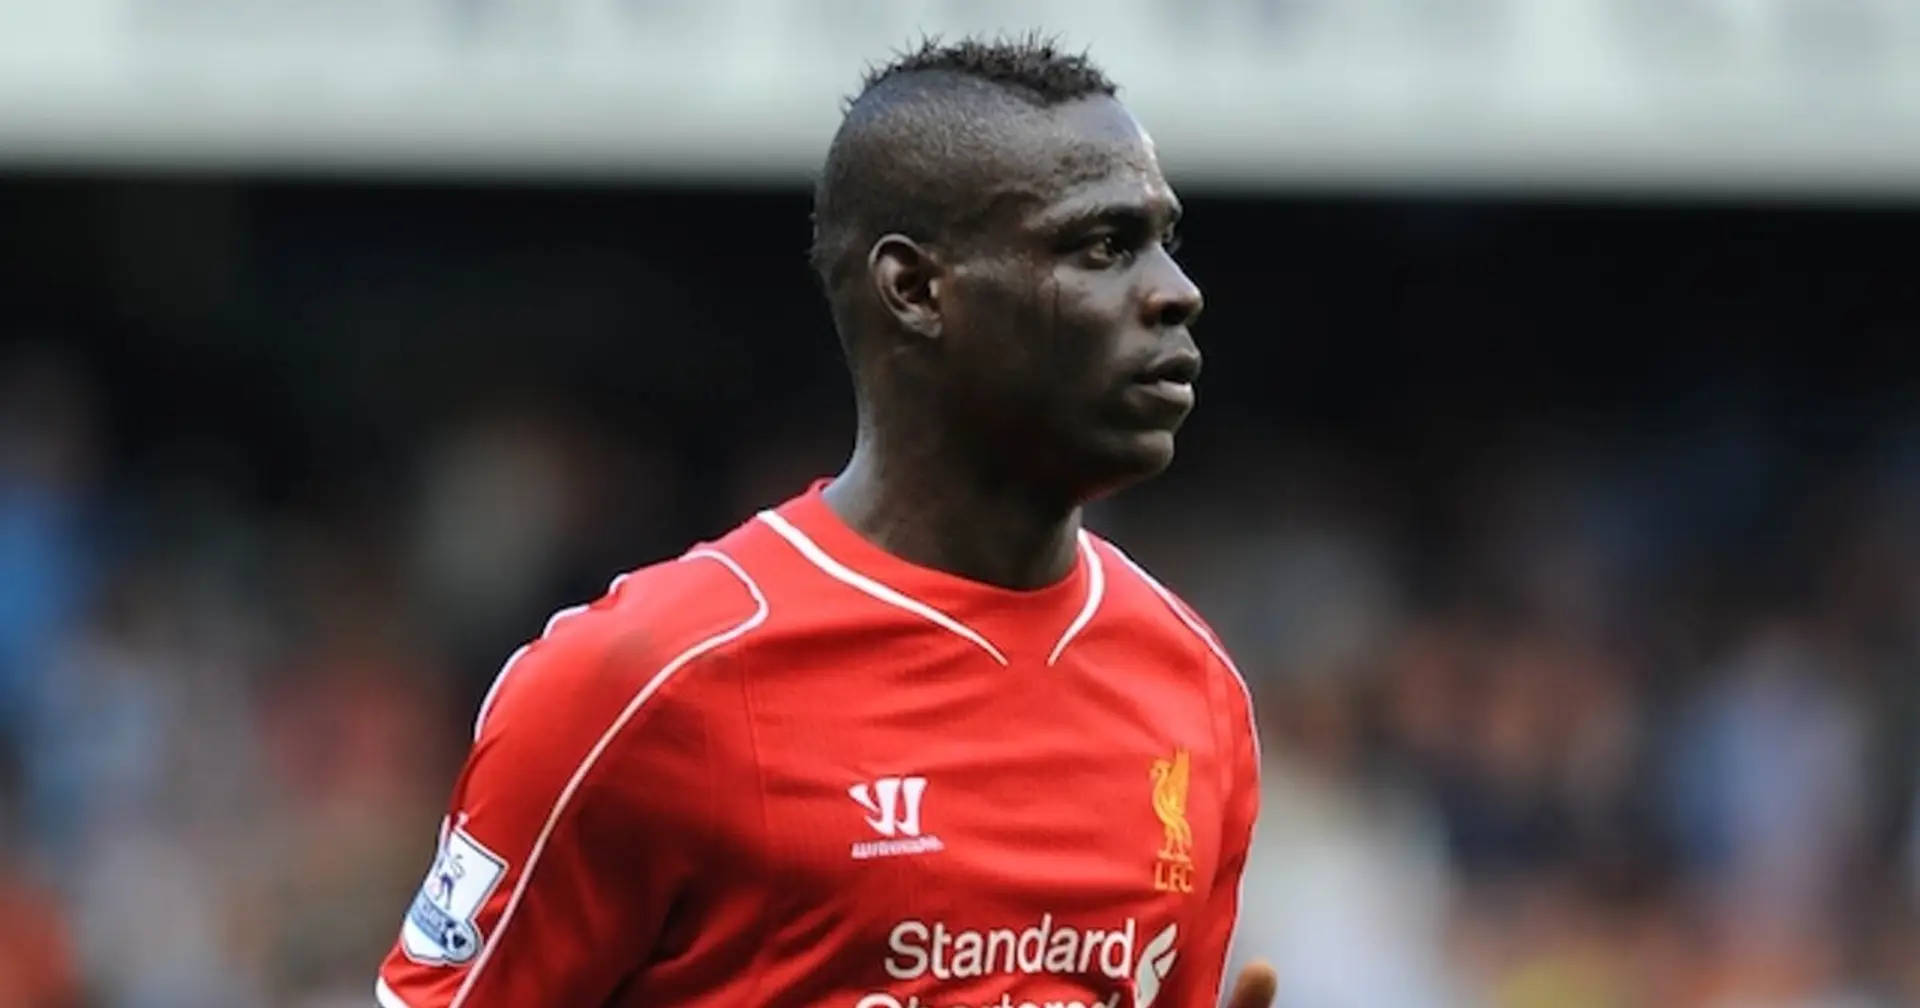 Almost 3 months of wages equal to one bonus for most basic thing: Recalling Mario Balotelli's funny Liverpool contract